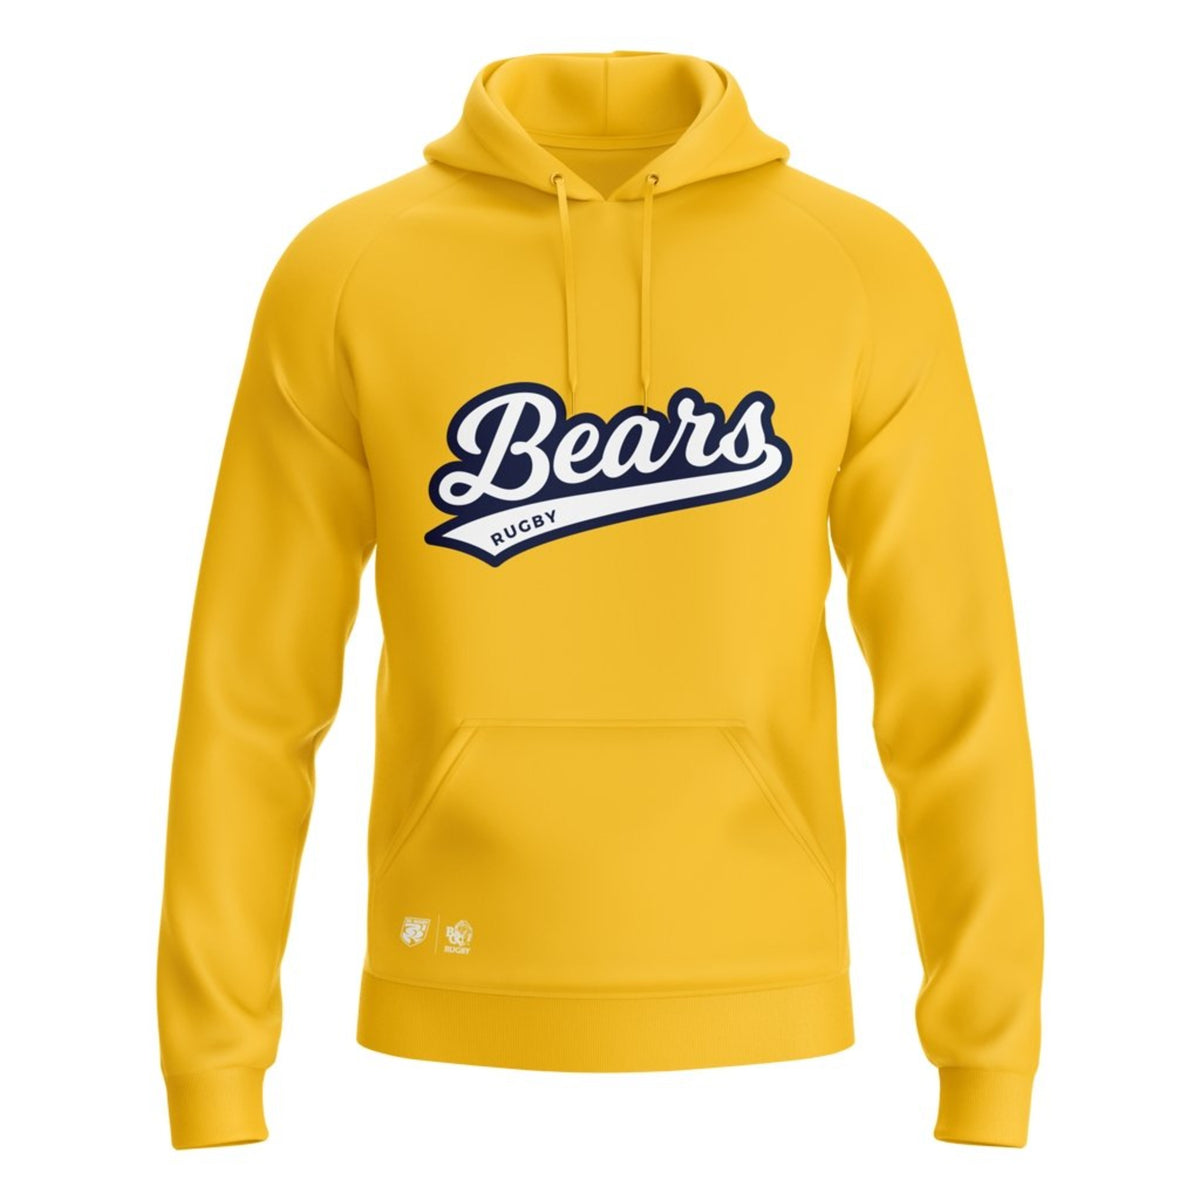 BC Rugby 2021 &quot;Bears&quot; Hoodie - Youth Unisex - www.therugbyshop.com www.therugbyshop.com YOUTH / GOLD / S XIX Brands HOODIES BC Rugby 2021 &quot;Bears&quot; Hoodie - Youth Unisex